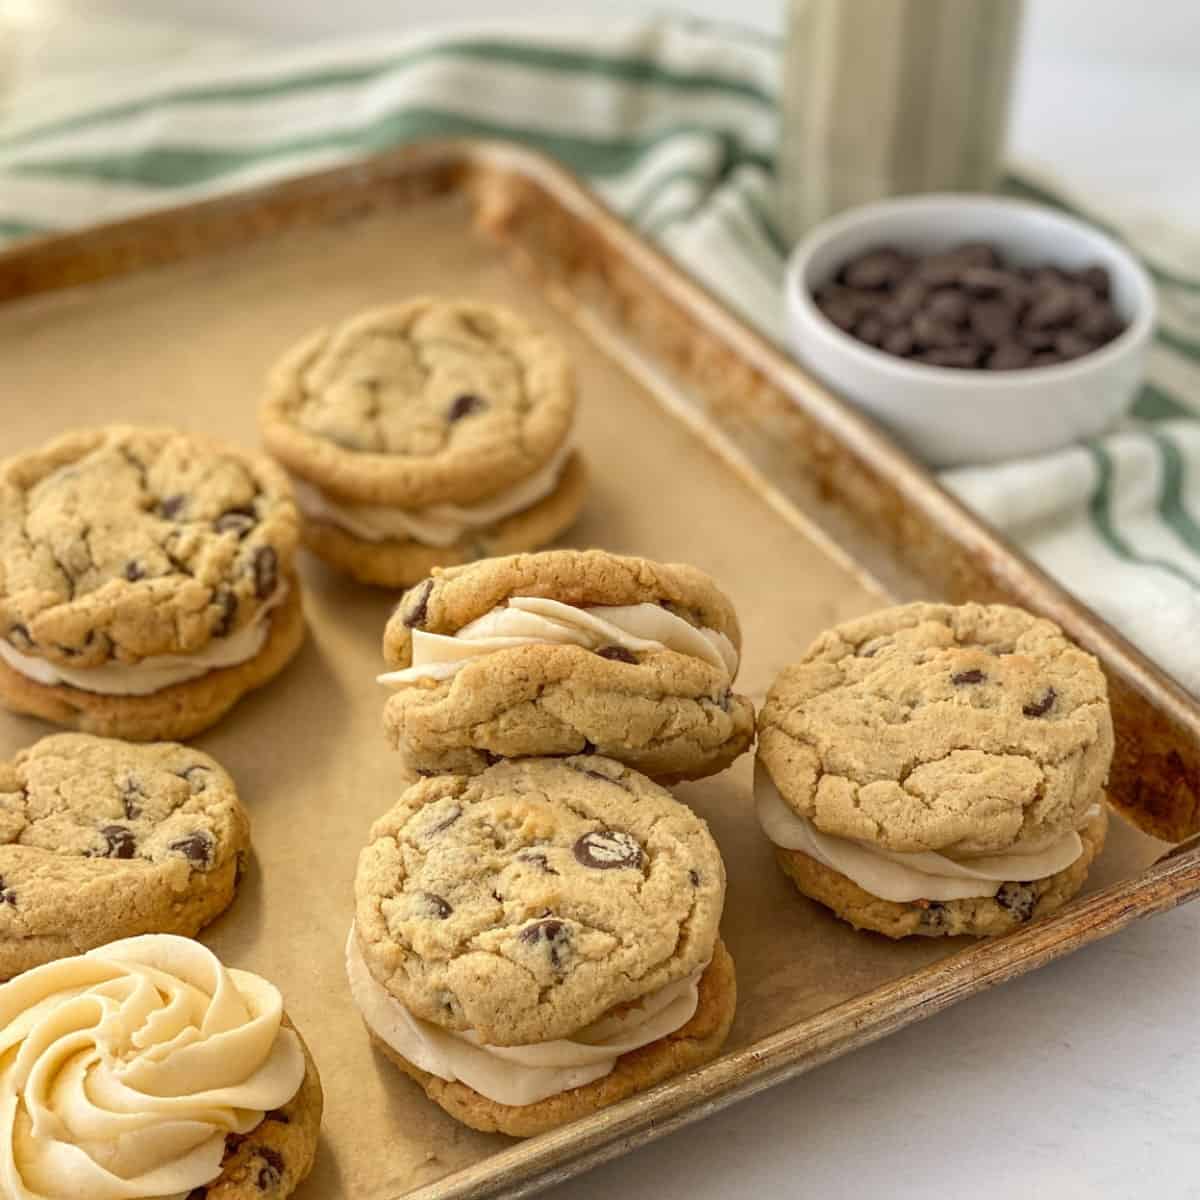 Bailey's Chocolate Chip Cookies on a baking sheet.